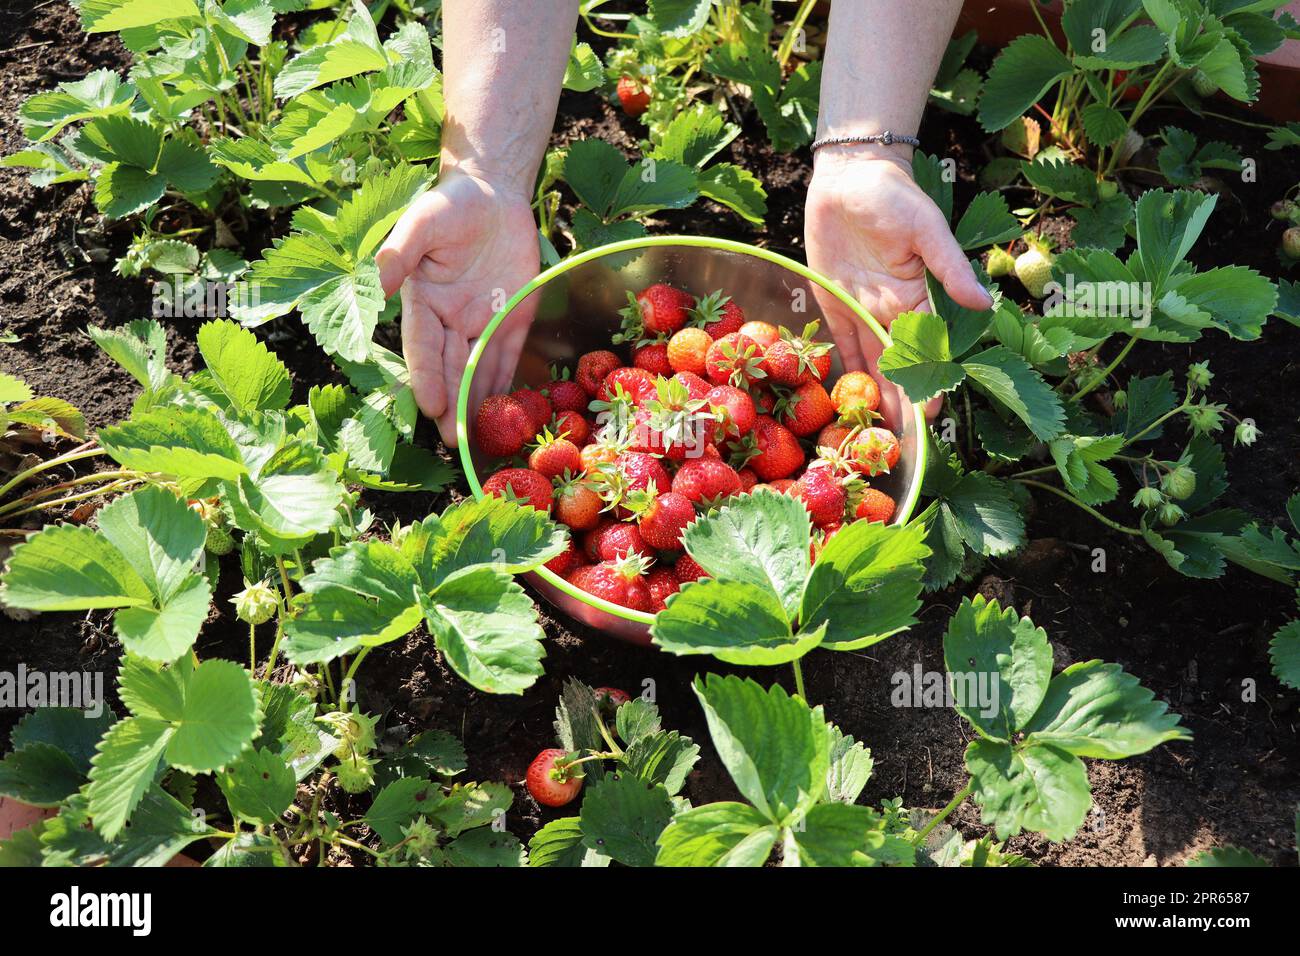 Picking fruits on strawberry field, Harvesting on strawberry farm, strawberry crop. Fresh ripe organic berries in bowl. Woman holding bowl with strawberry. Agriculture and ecological fruit farming concept Stock Photo